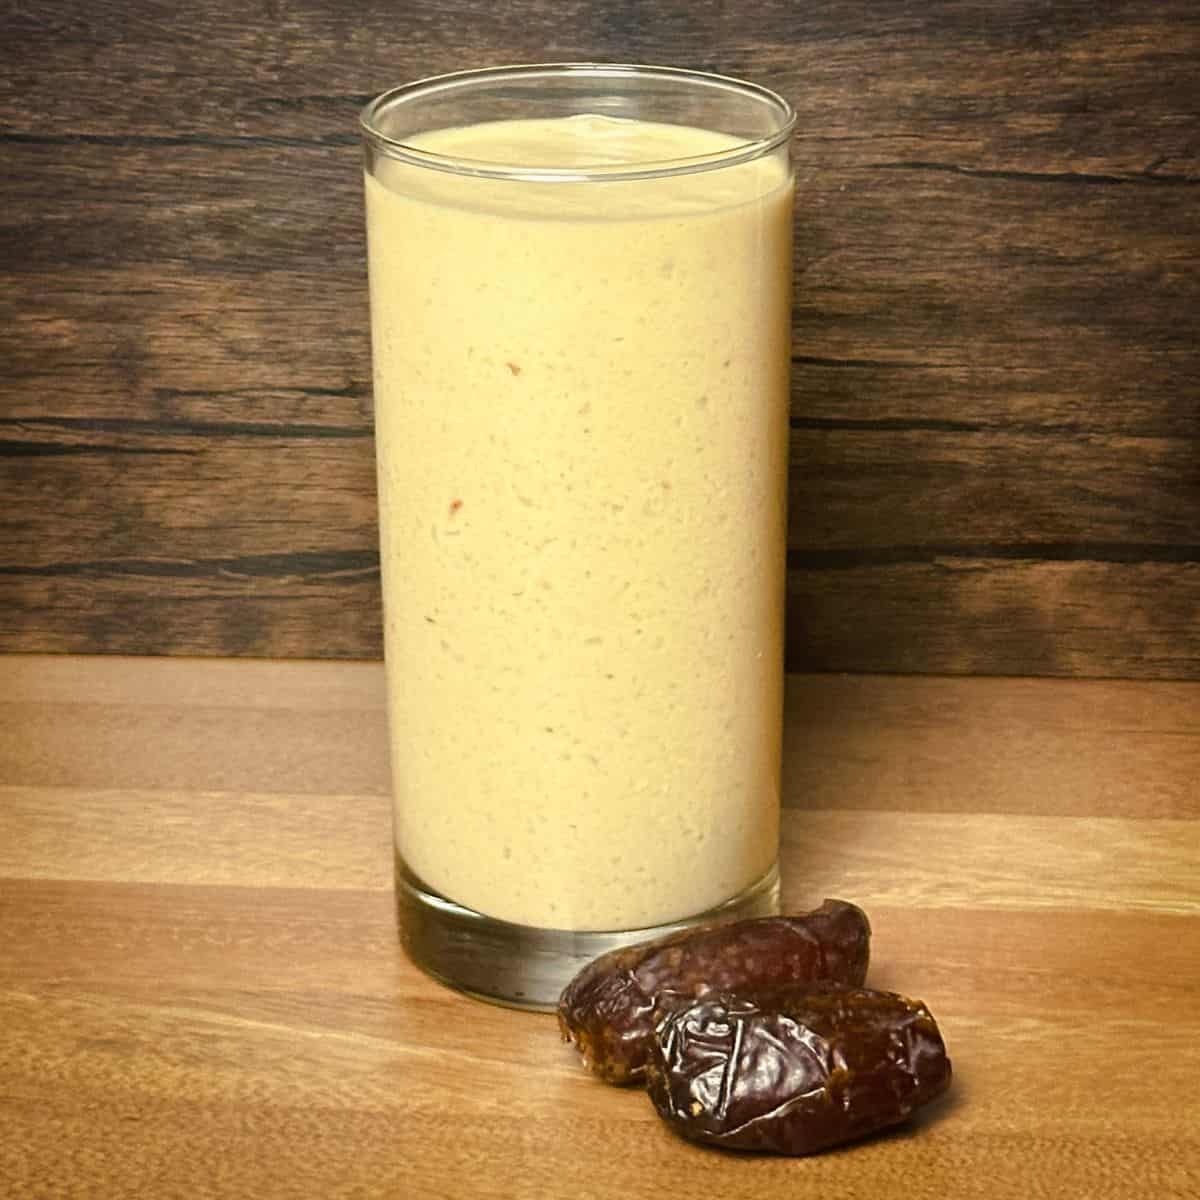 A creamy, blended peanut butter smoothie in a clear glass, exhibiting a rich golden color, placed next to two dark Medjool dates on a wooden tabletop, indicative of the Peanut Paradise flavor.